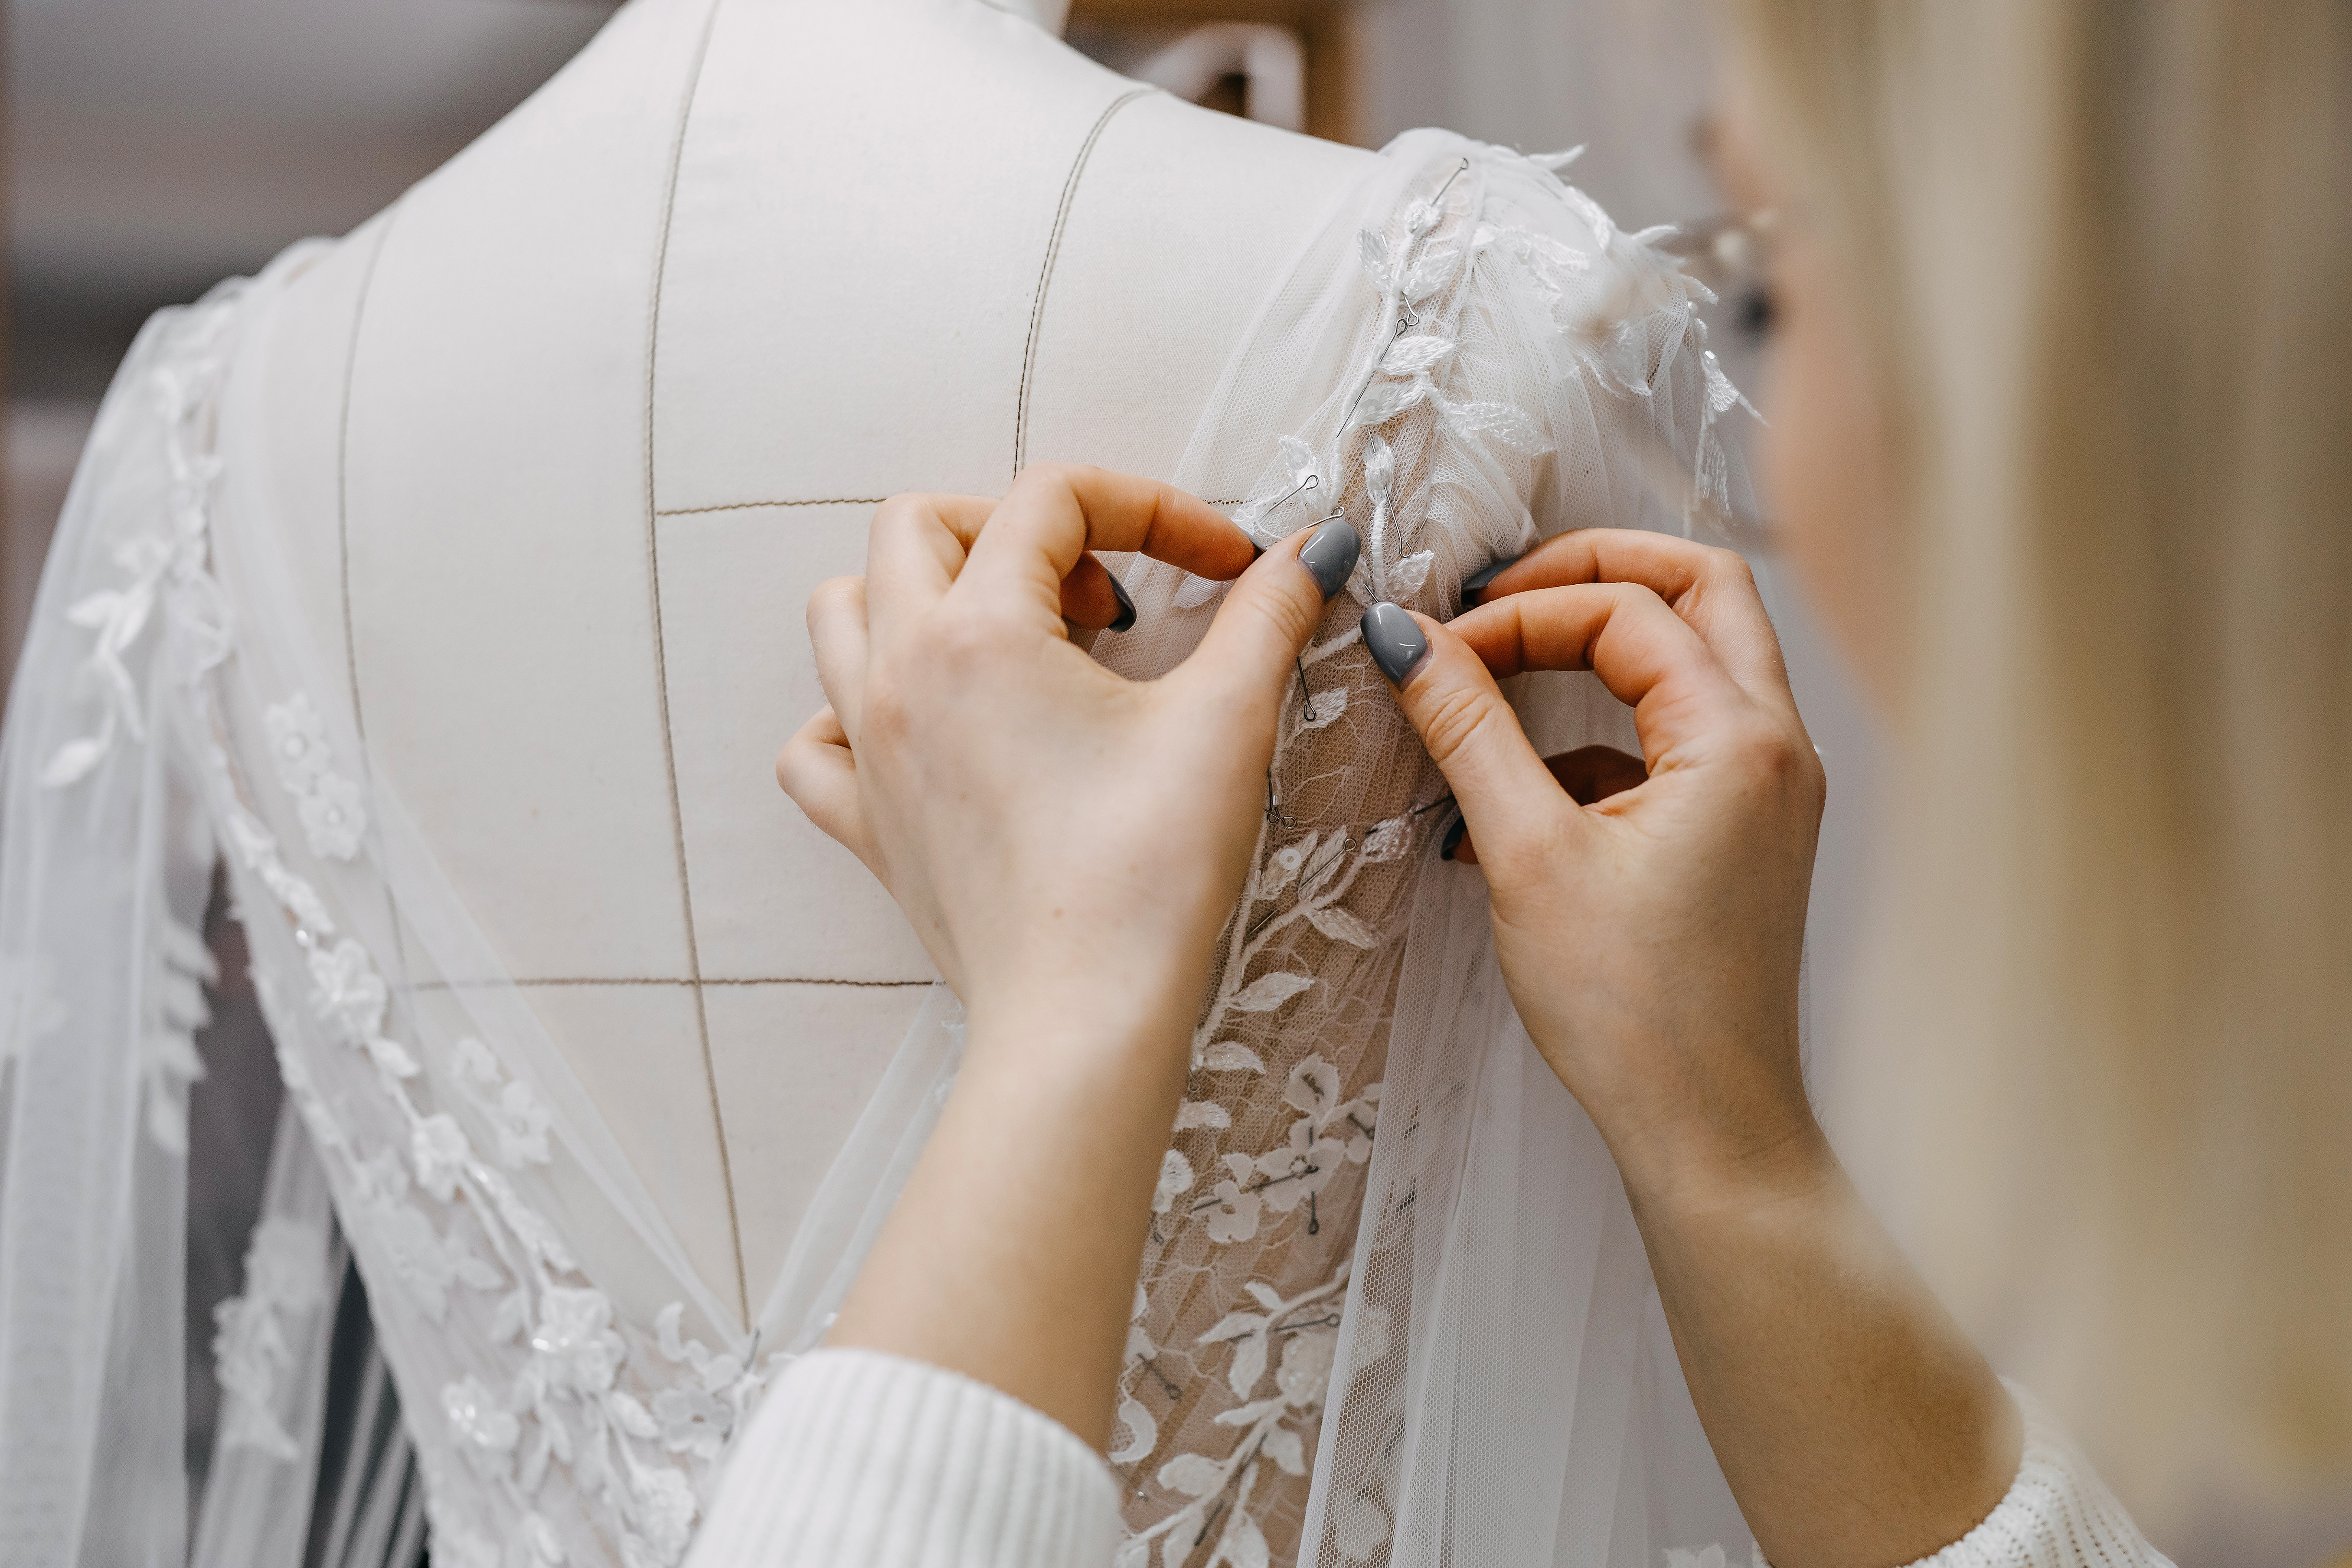 A woman sewing a bridal gown | Source: Shutterstock